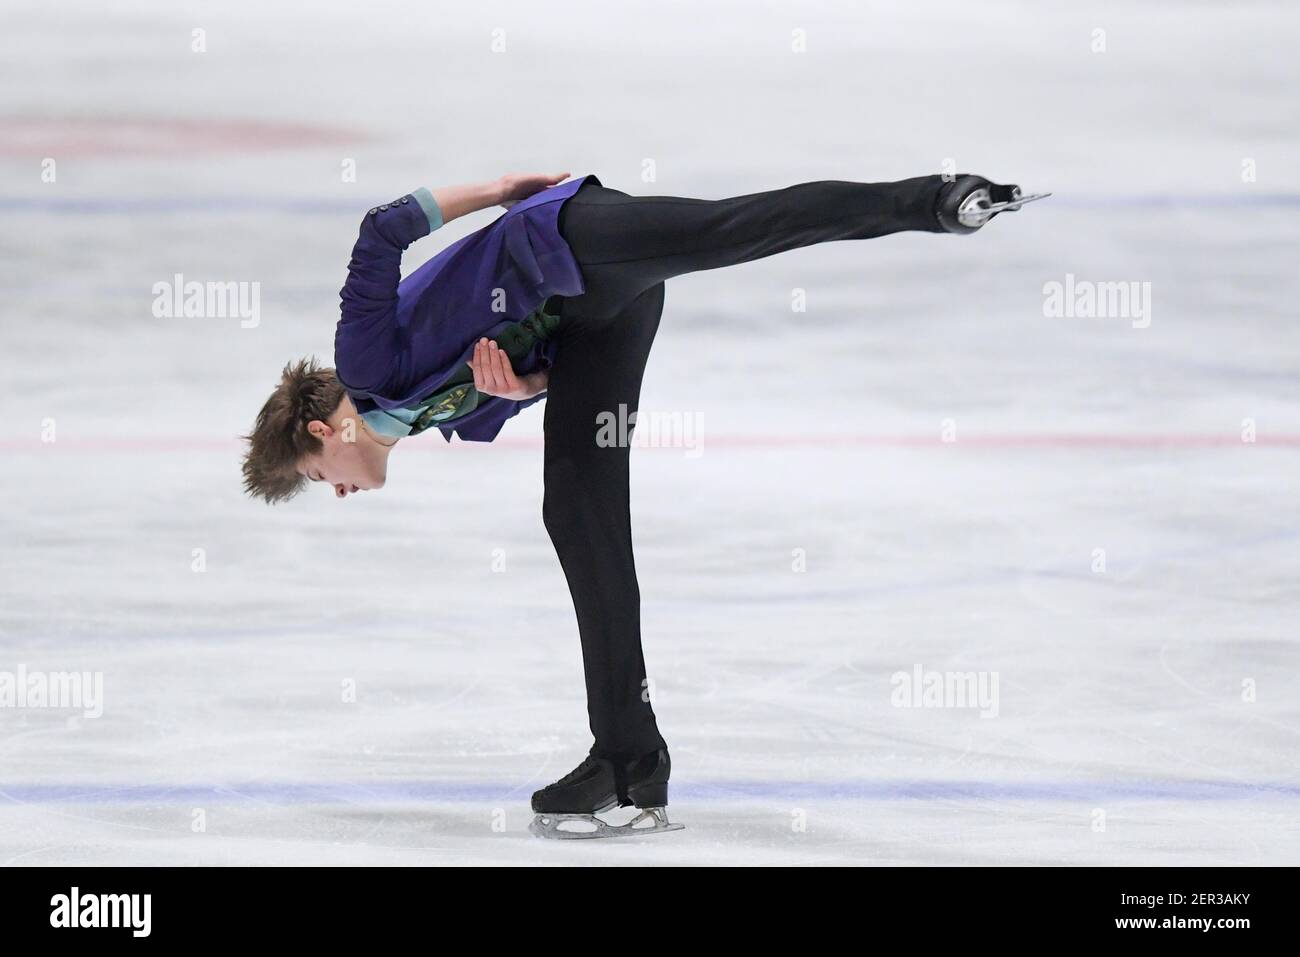 THE HAGUE, NETHERLANDS - FEBRUARY 28: Georgii Reshtenko of Czech Republic competes in the figure skating men's free skate program on Day 4 during the Stock Photo